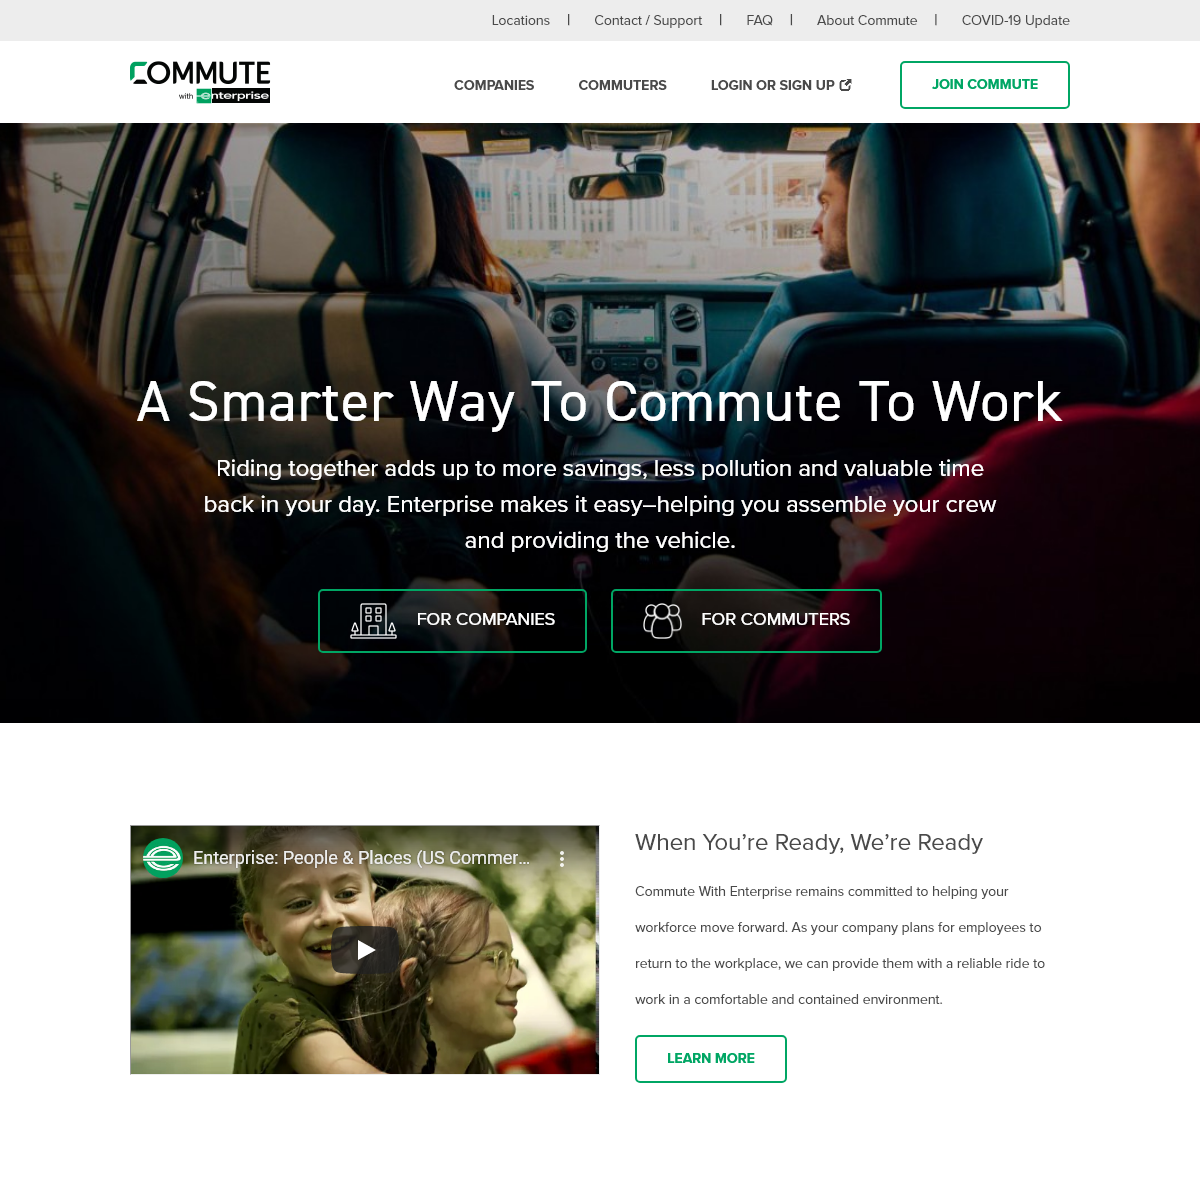 A complete backup of commutewithenterprise.com